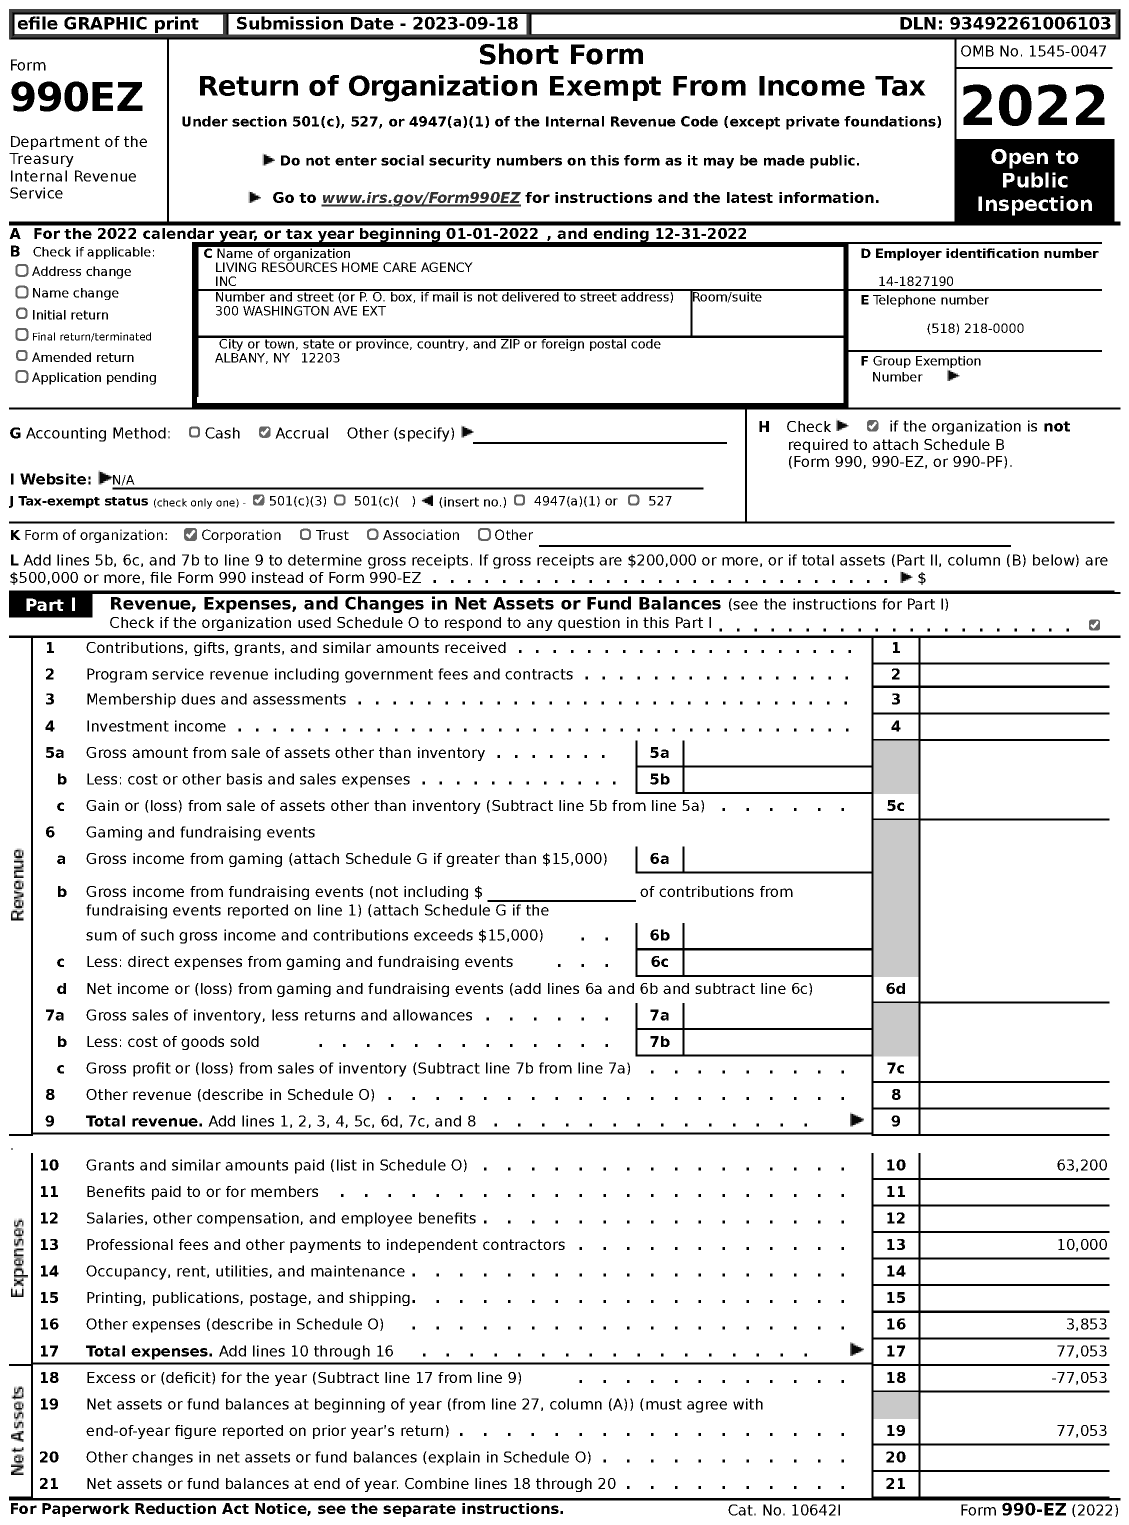 Image of first page of 2022 Form 990EZ for Living Resources Home Care Agency